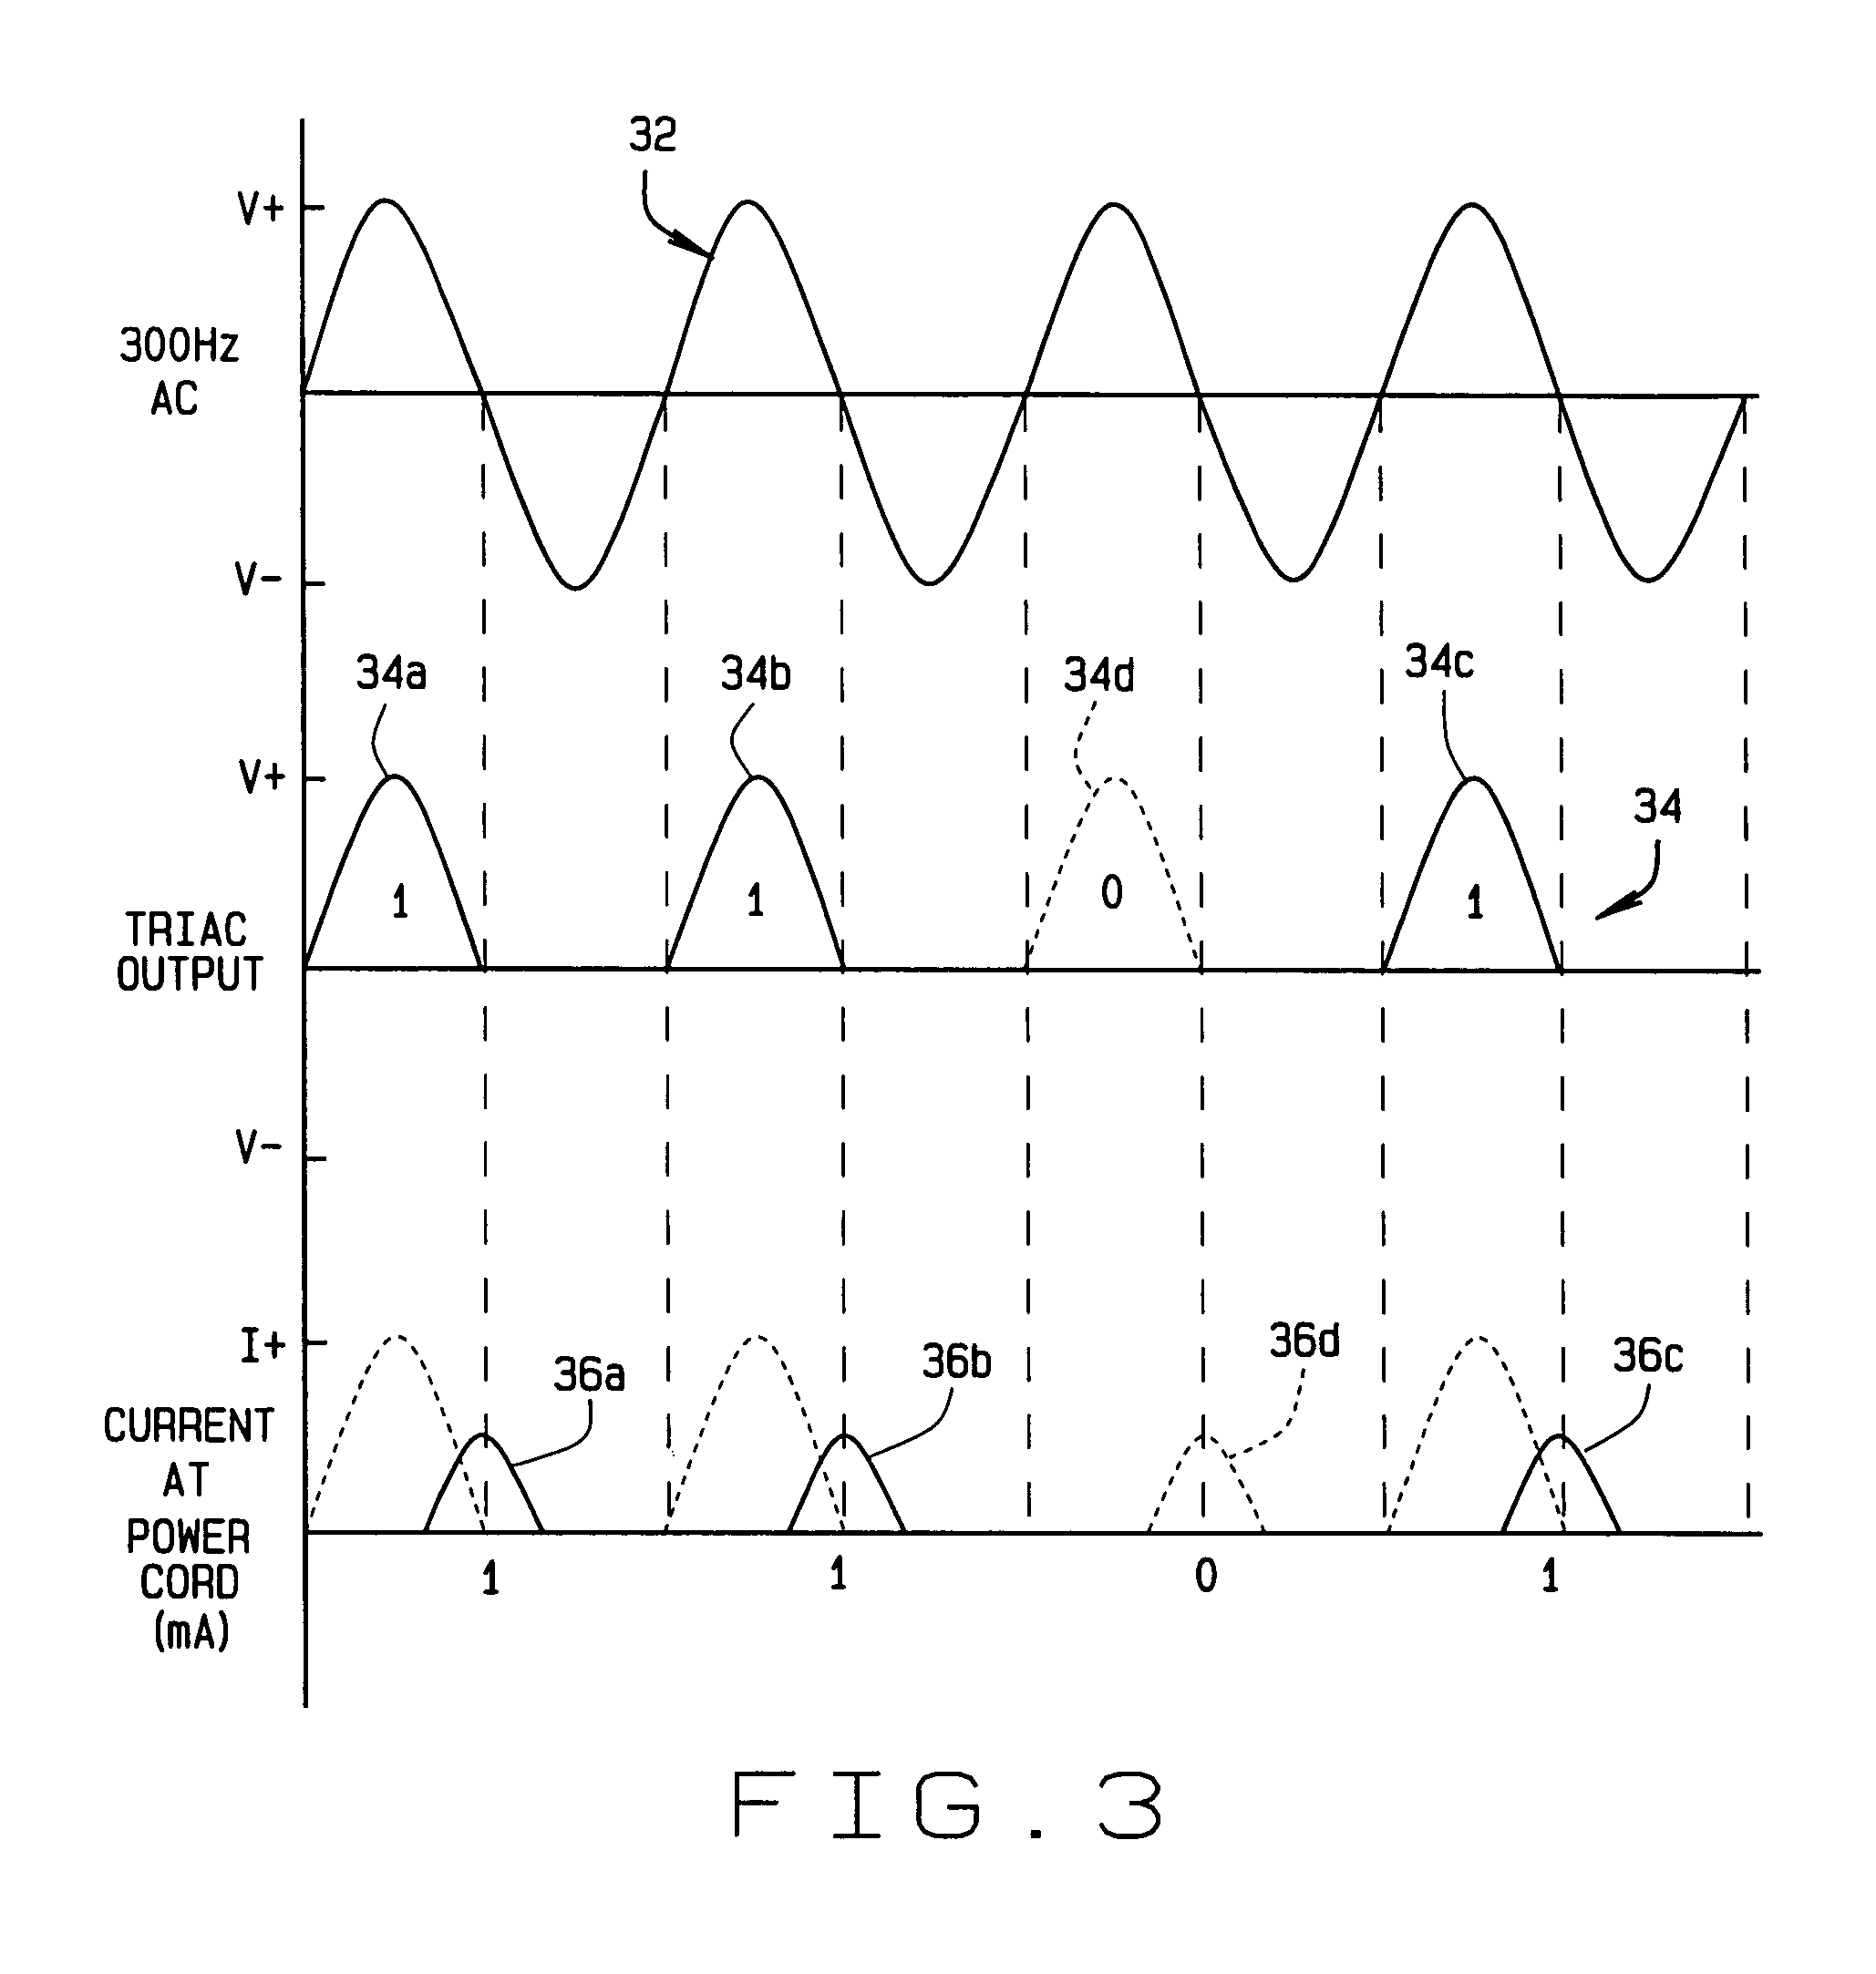 System and method for data retrieval in AC power tools via an AC line cord